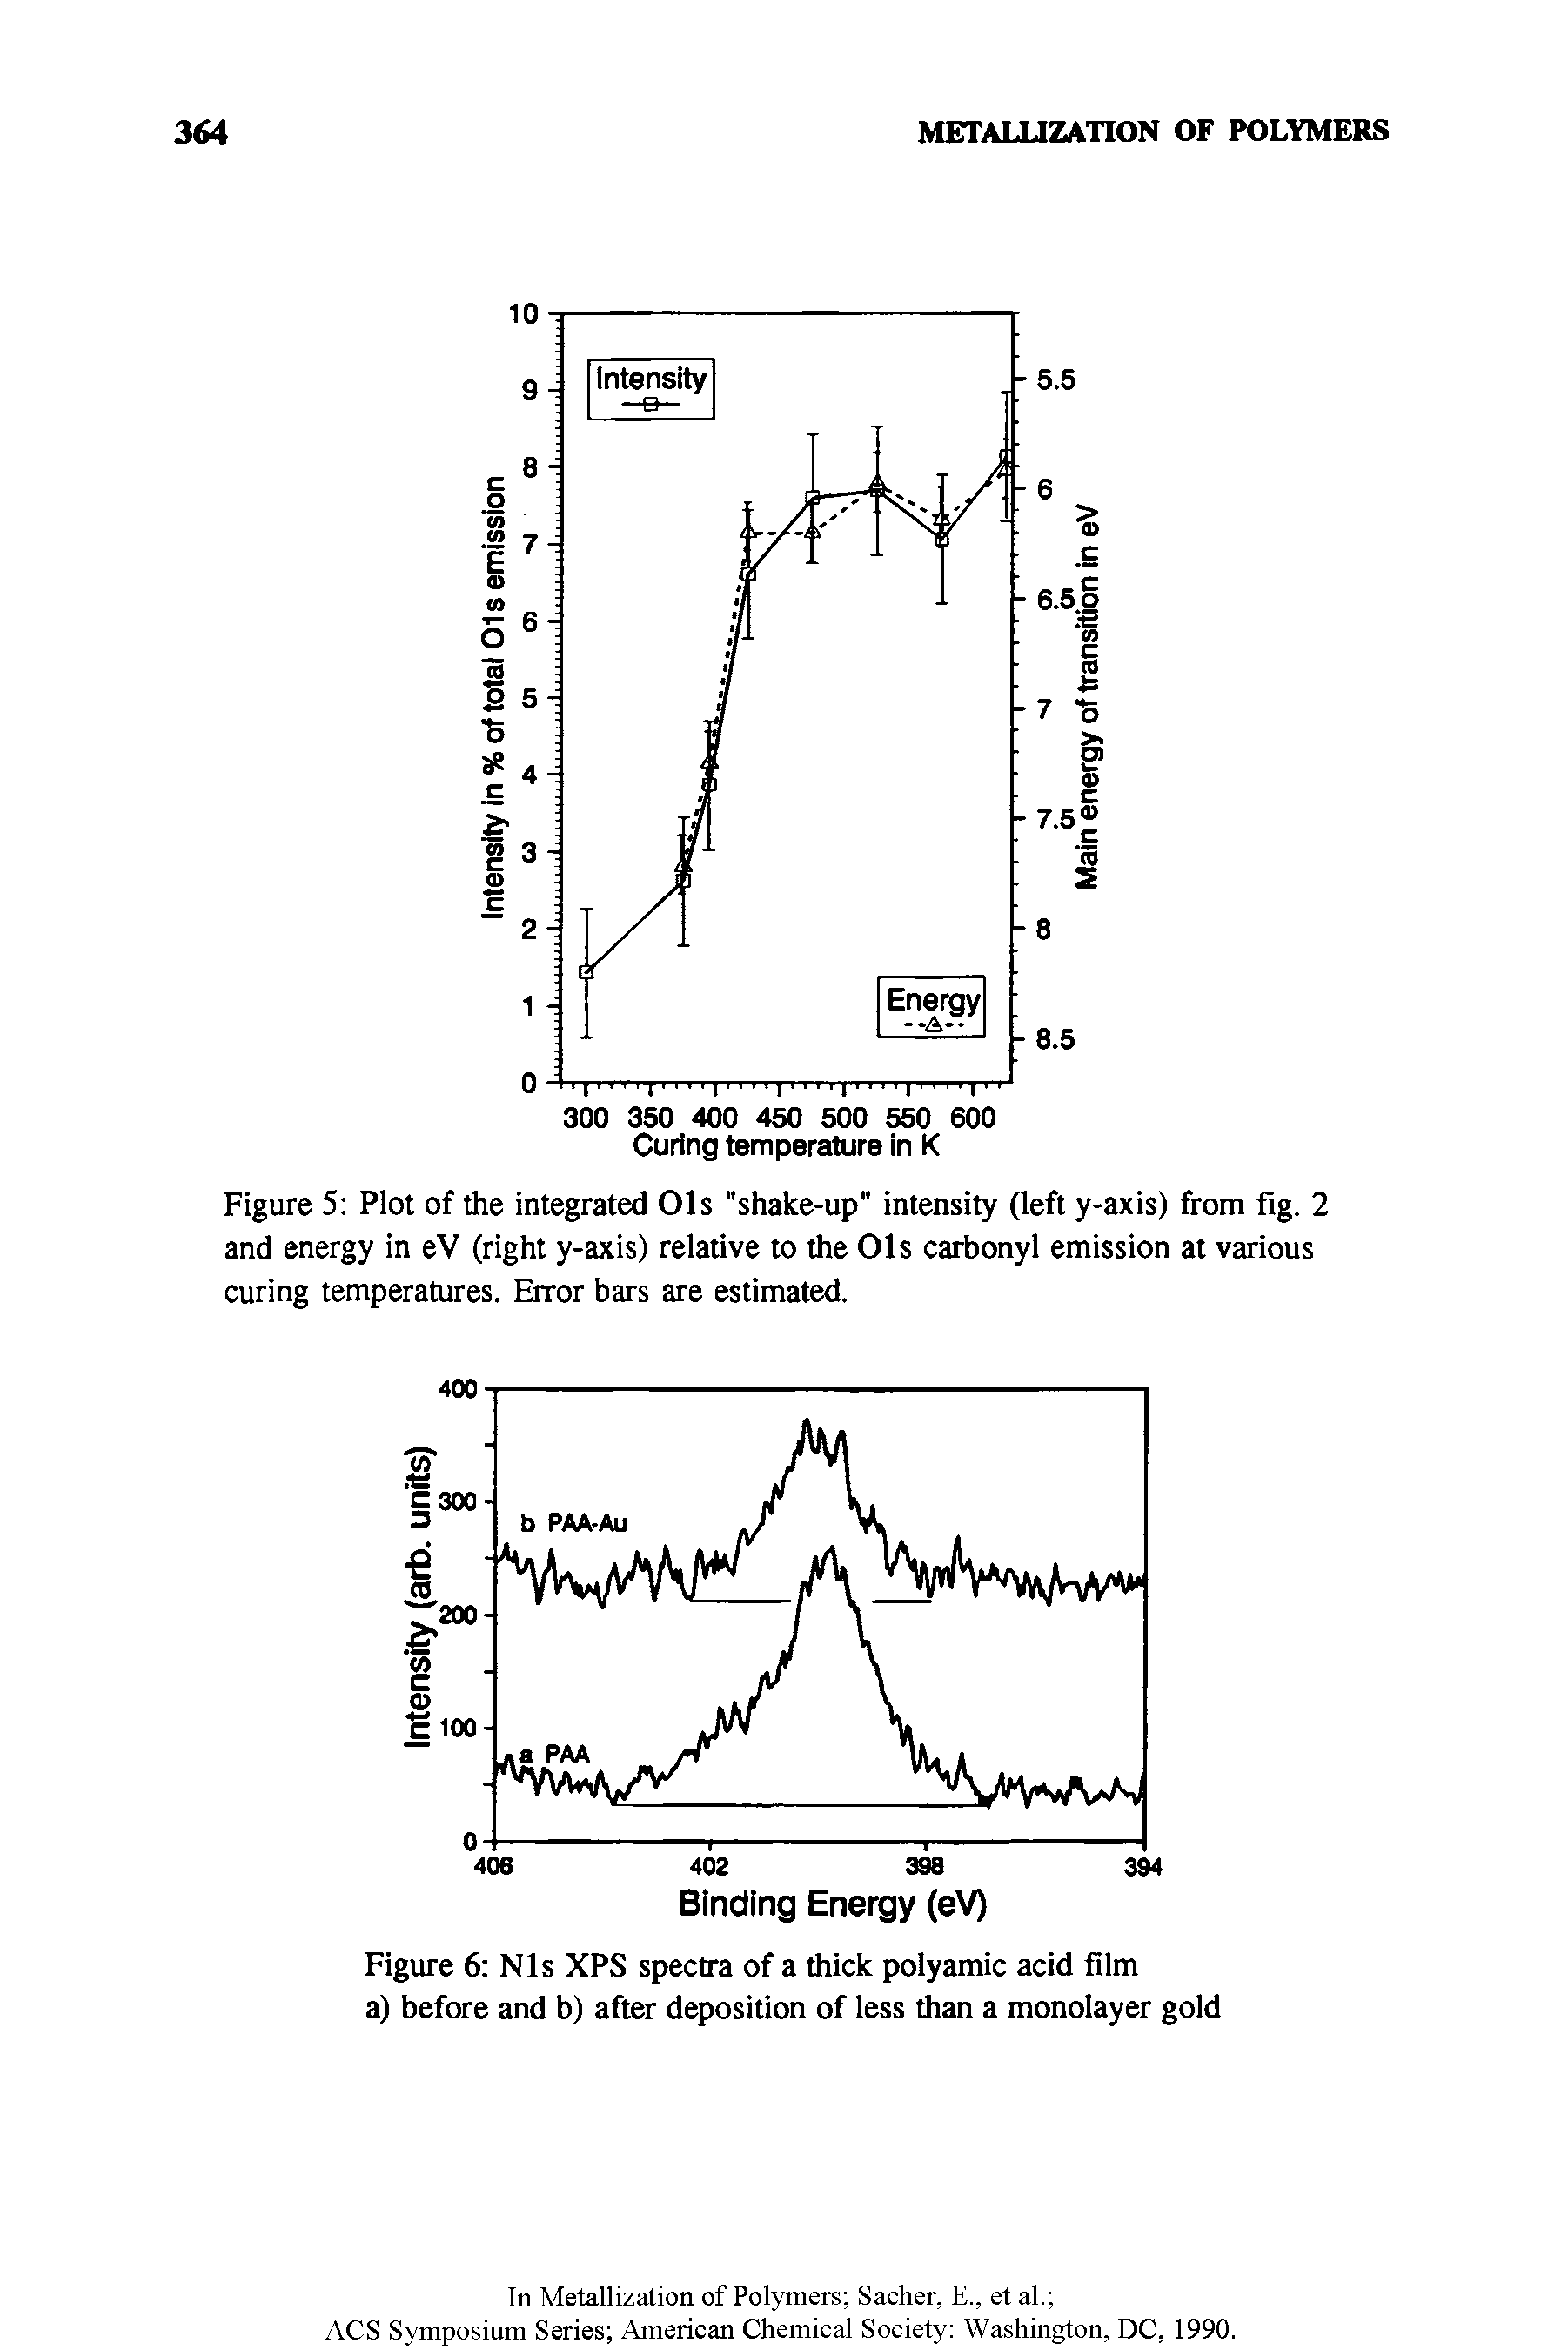 Figure 5 Plot of the integrated Ols "shake-up" intensity (left y-axis) from fig. 2 and energy in eV (right y-axis) relative to the Ols carbonyl emission at various curing temperatures. Error bars are estimated.